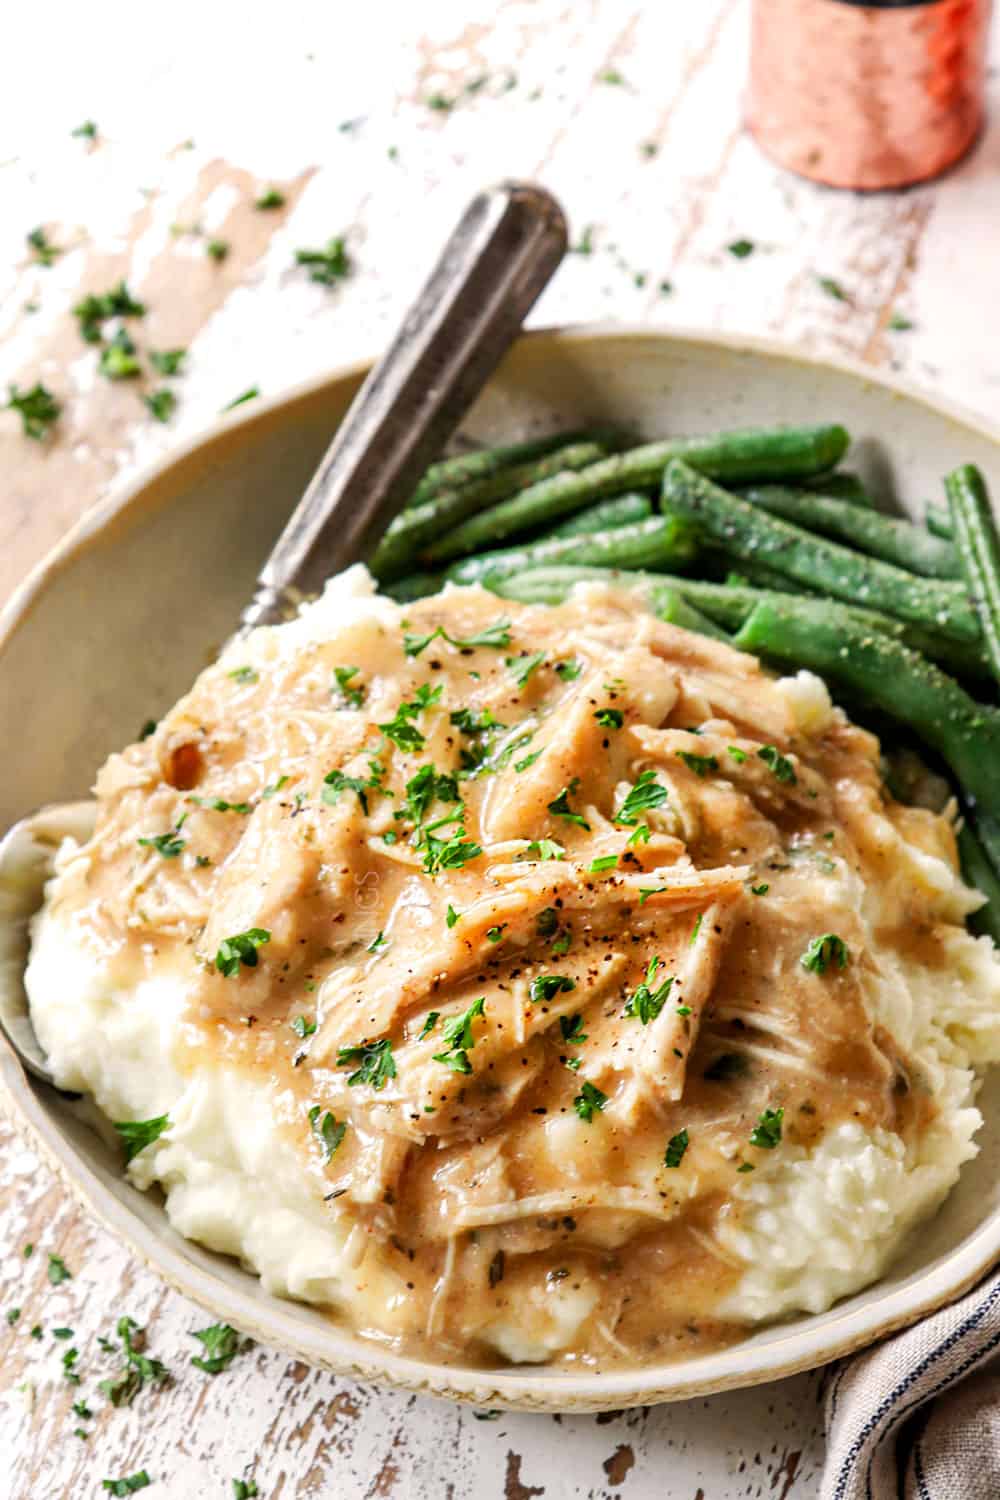 chicken and gravy on a bed of mashed potatoes garnished by parsley on a plate